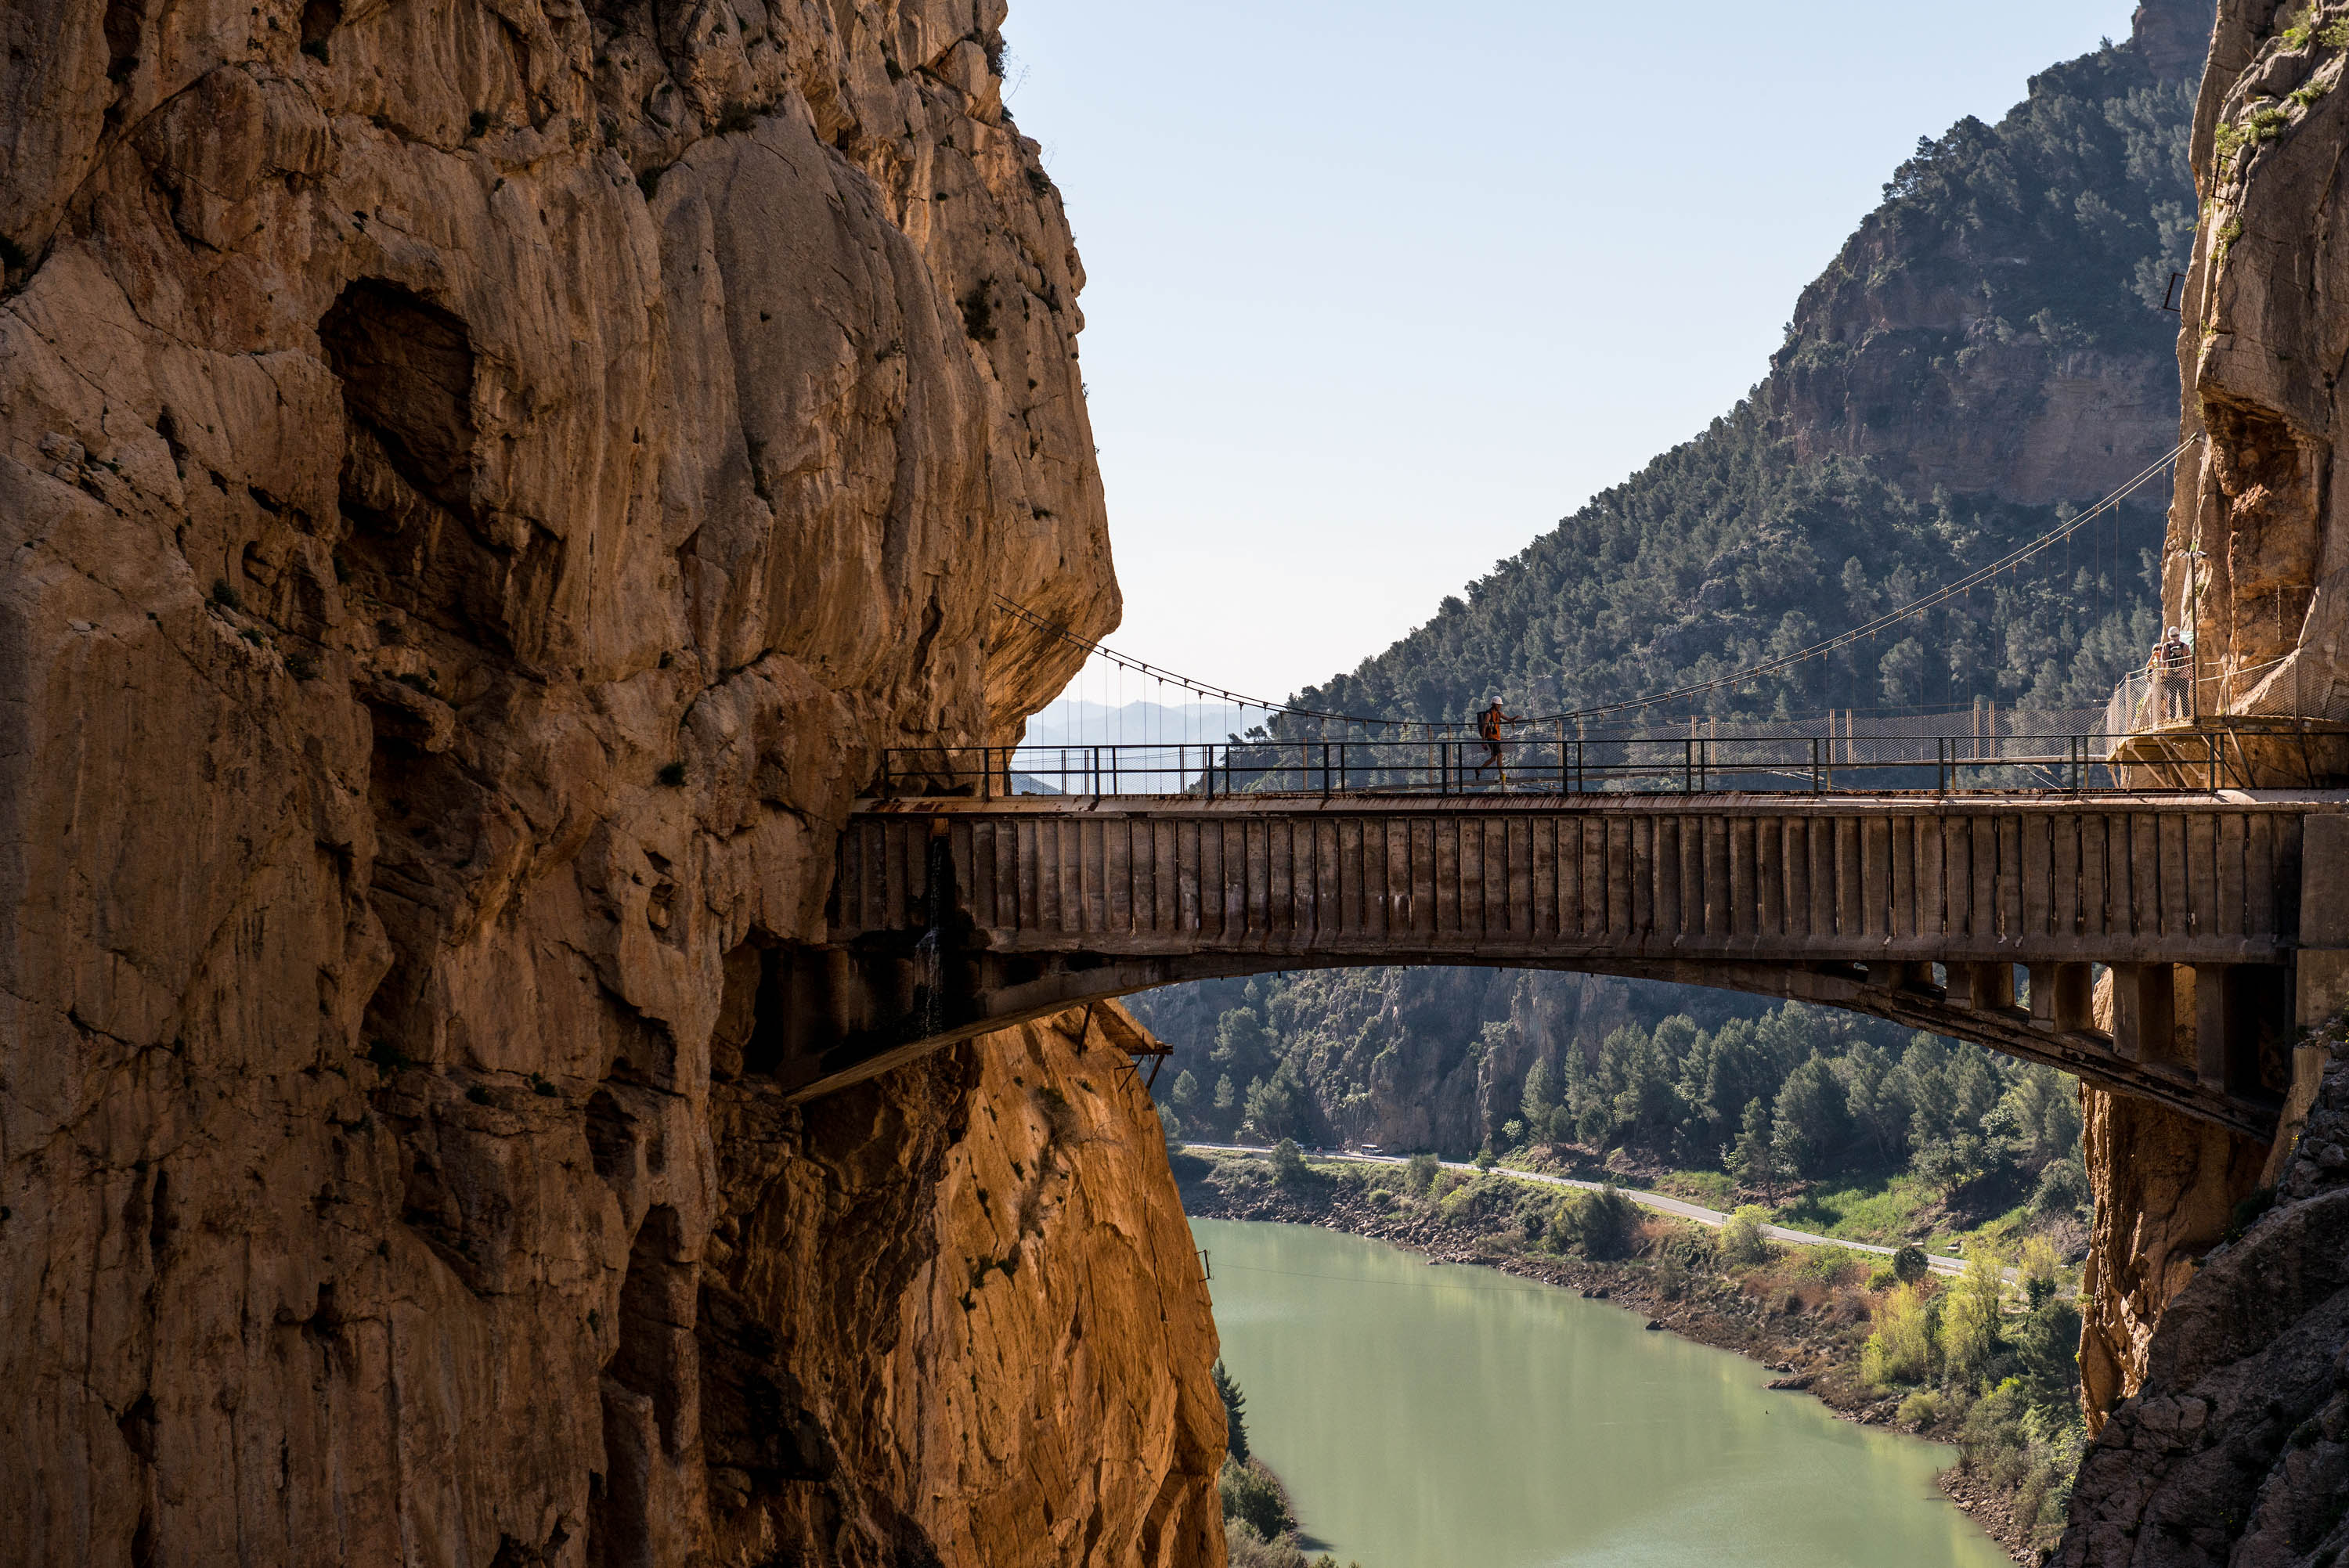 Tourists walk along the 'El Caminito del Rey' (King's Little Path) footpath on April 1, 2015 in Malaga, Spain. (David Ramos&mdash;Getty Images)